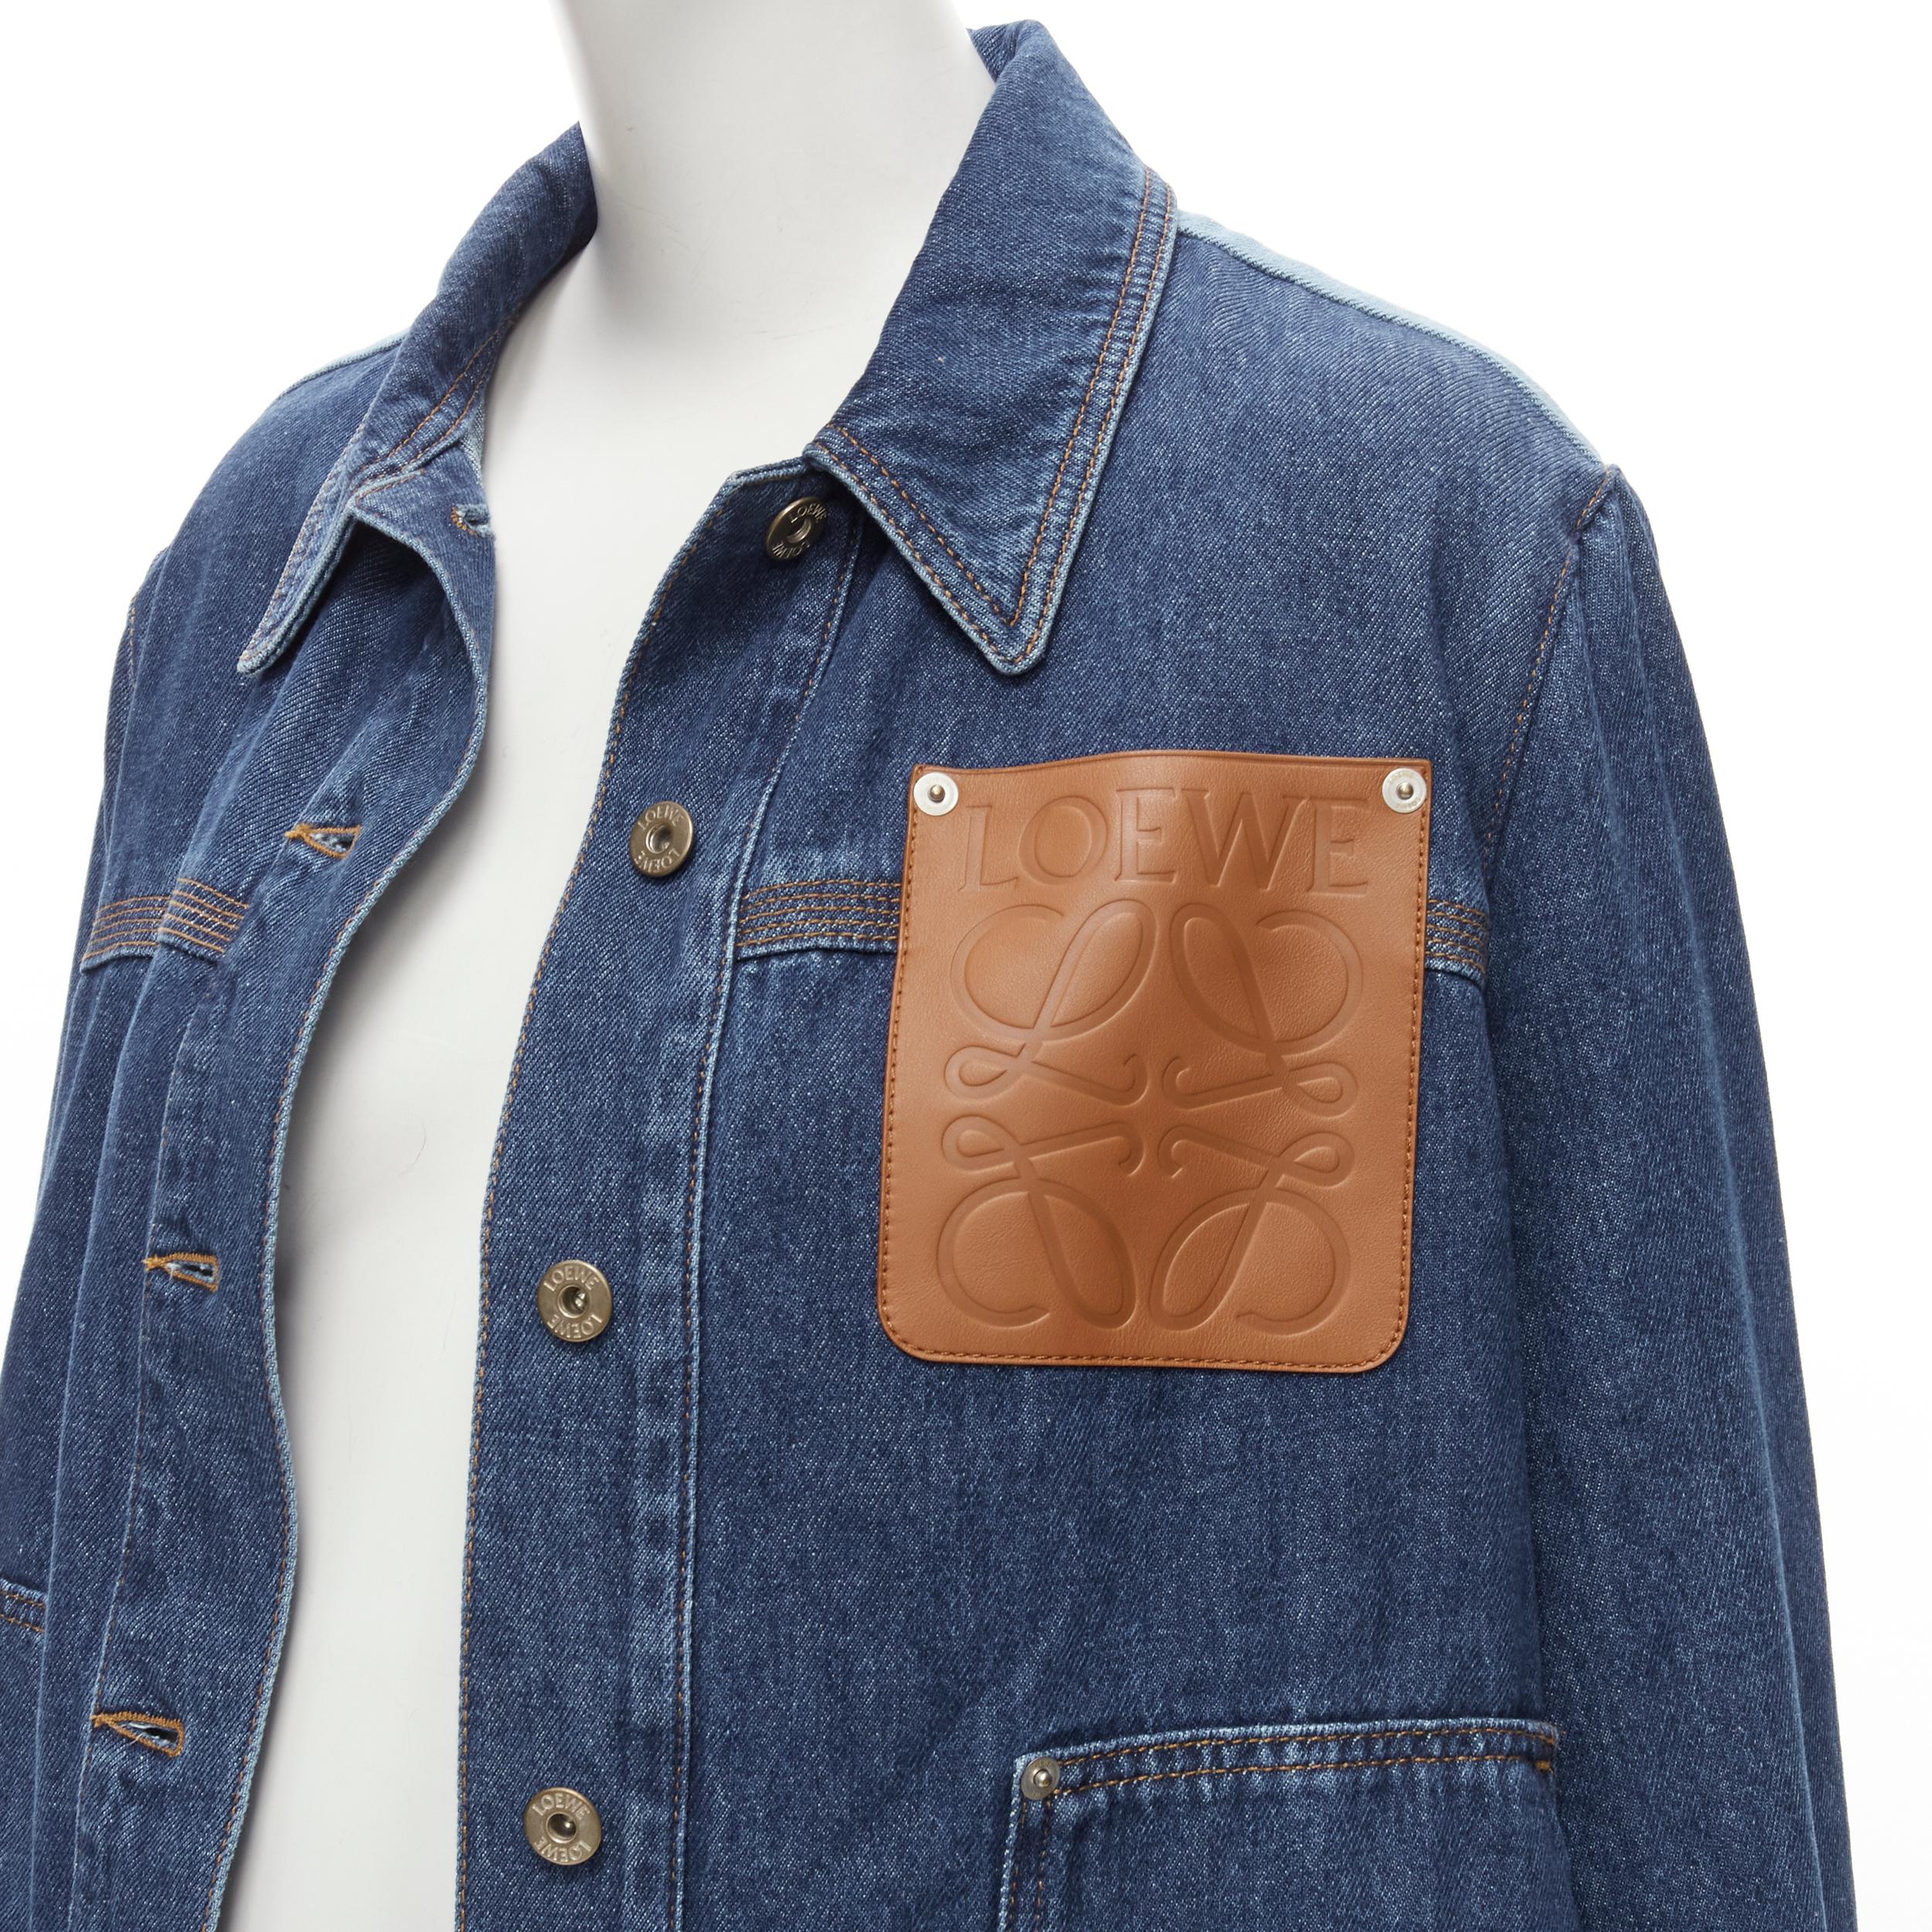 LOEWE Anagram patch leather pocket tie side high low denim jacket FR38 XS
Brand: Loewe
Designer: JW Anderson
Material: Cotton
Color: Blue
Pattern: Solid
Closure: Button
Extra Detail: Tan leather LOEWE Anagram logo patch pocket. Button front. Dual